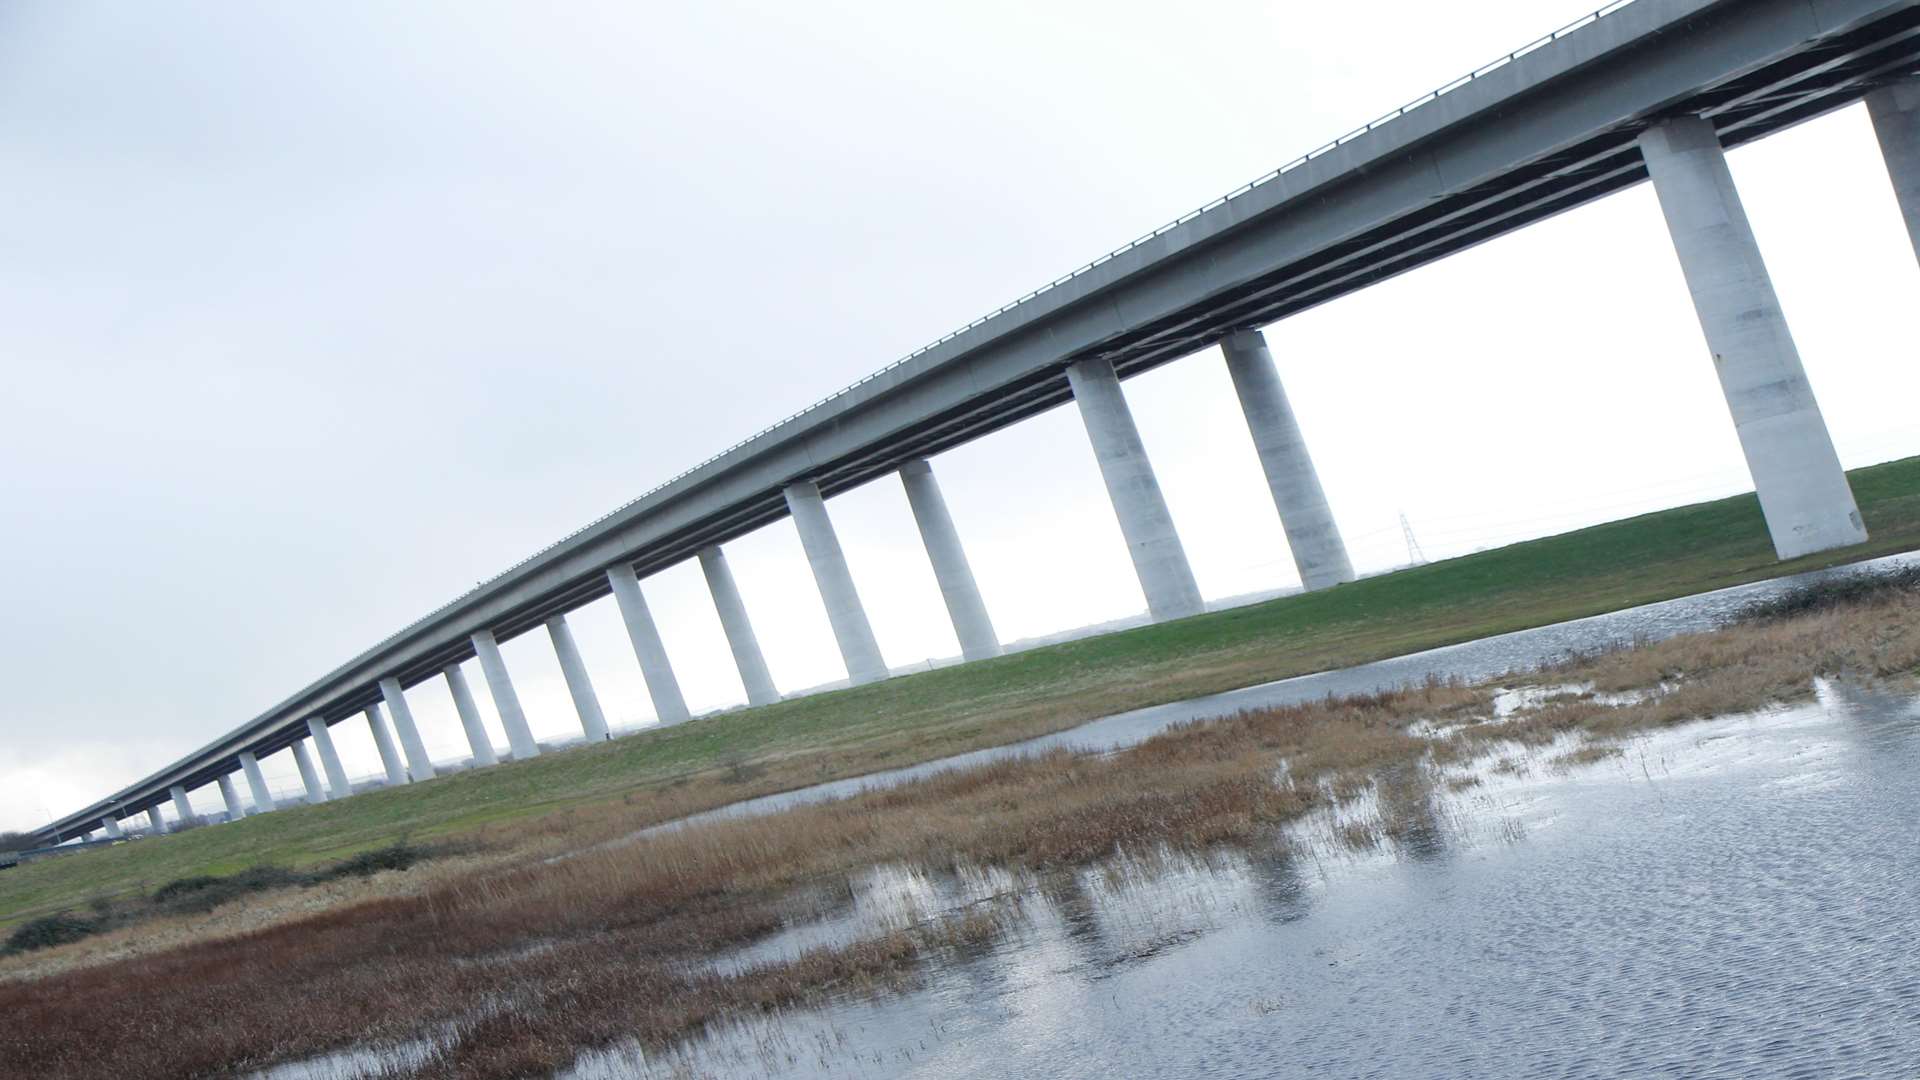 The Sheppey Crossing has been closed this morning